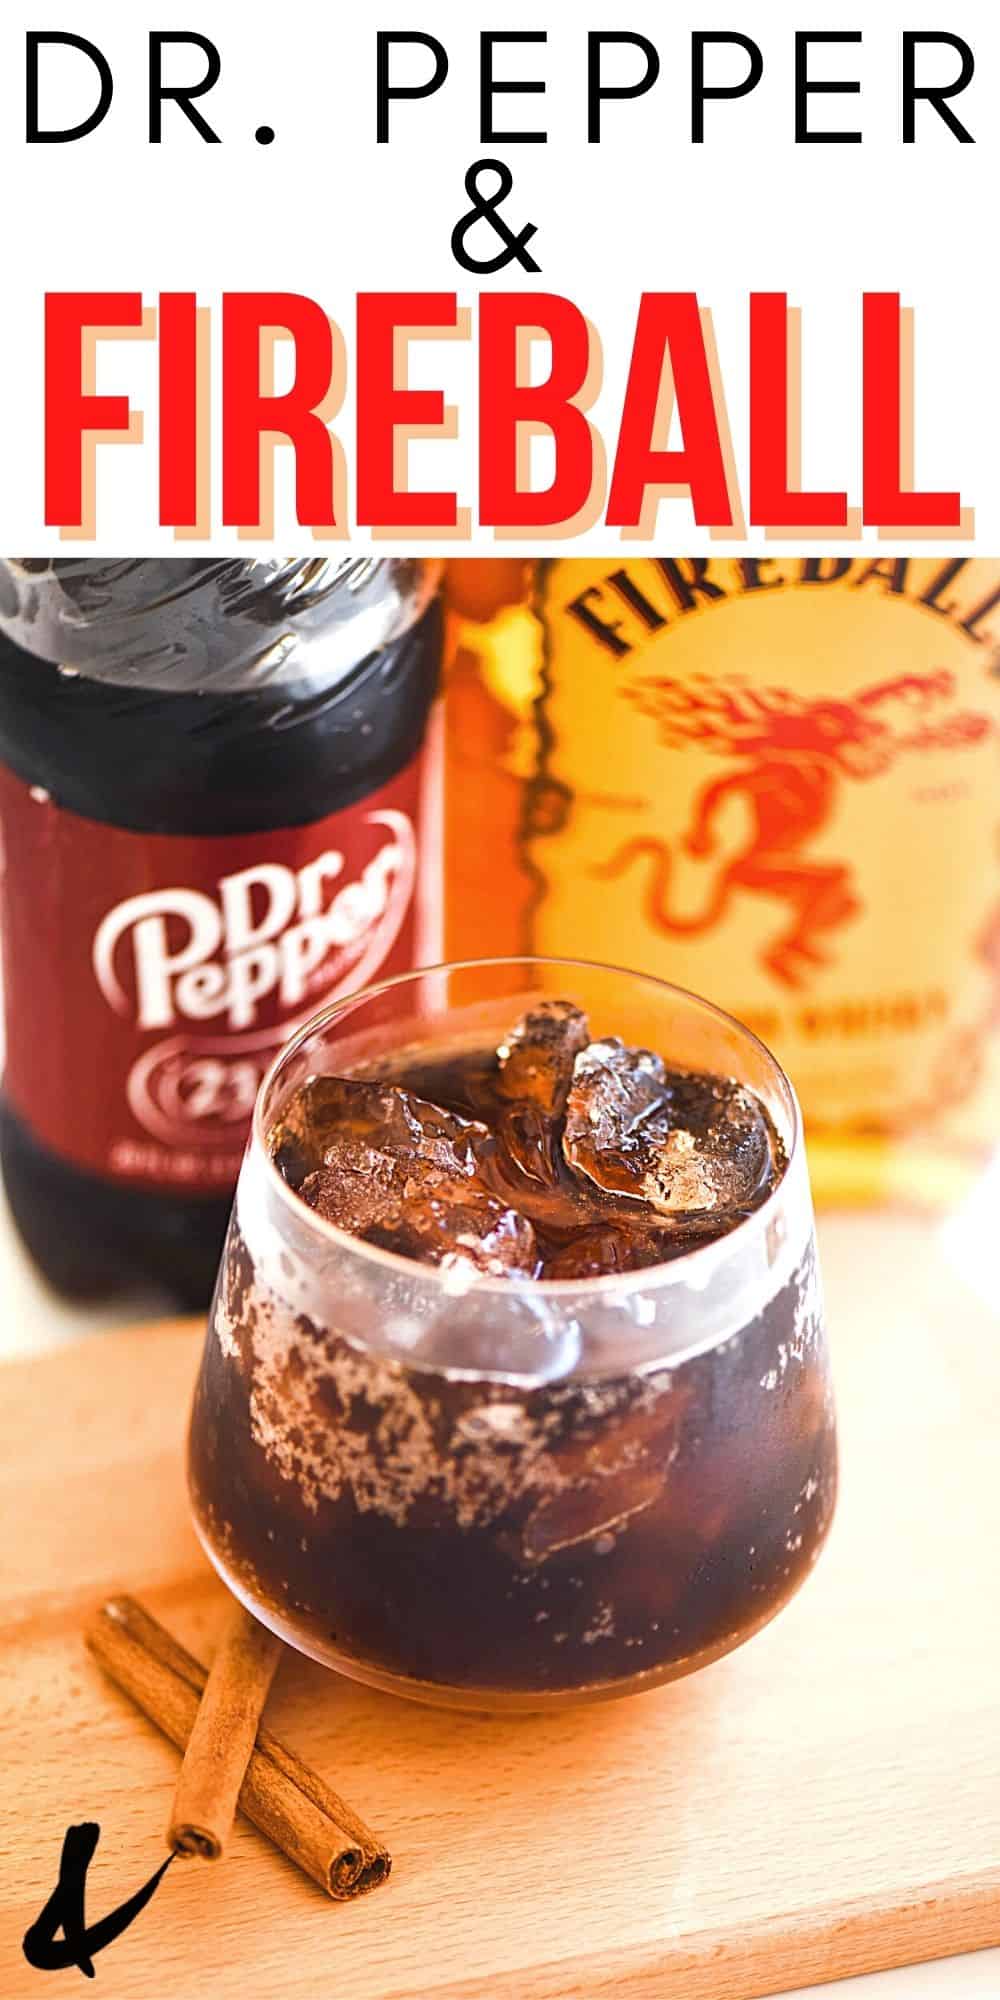 Quick and Spicy Fireball and Dr. Pepper Cocktail - Cupcakes and Cutlery